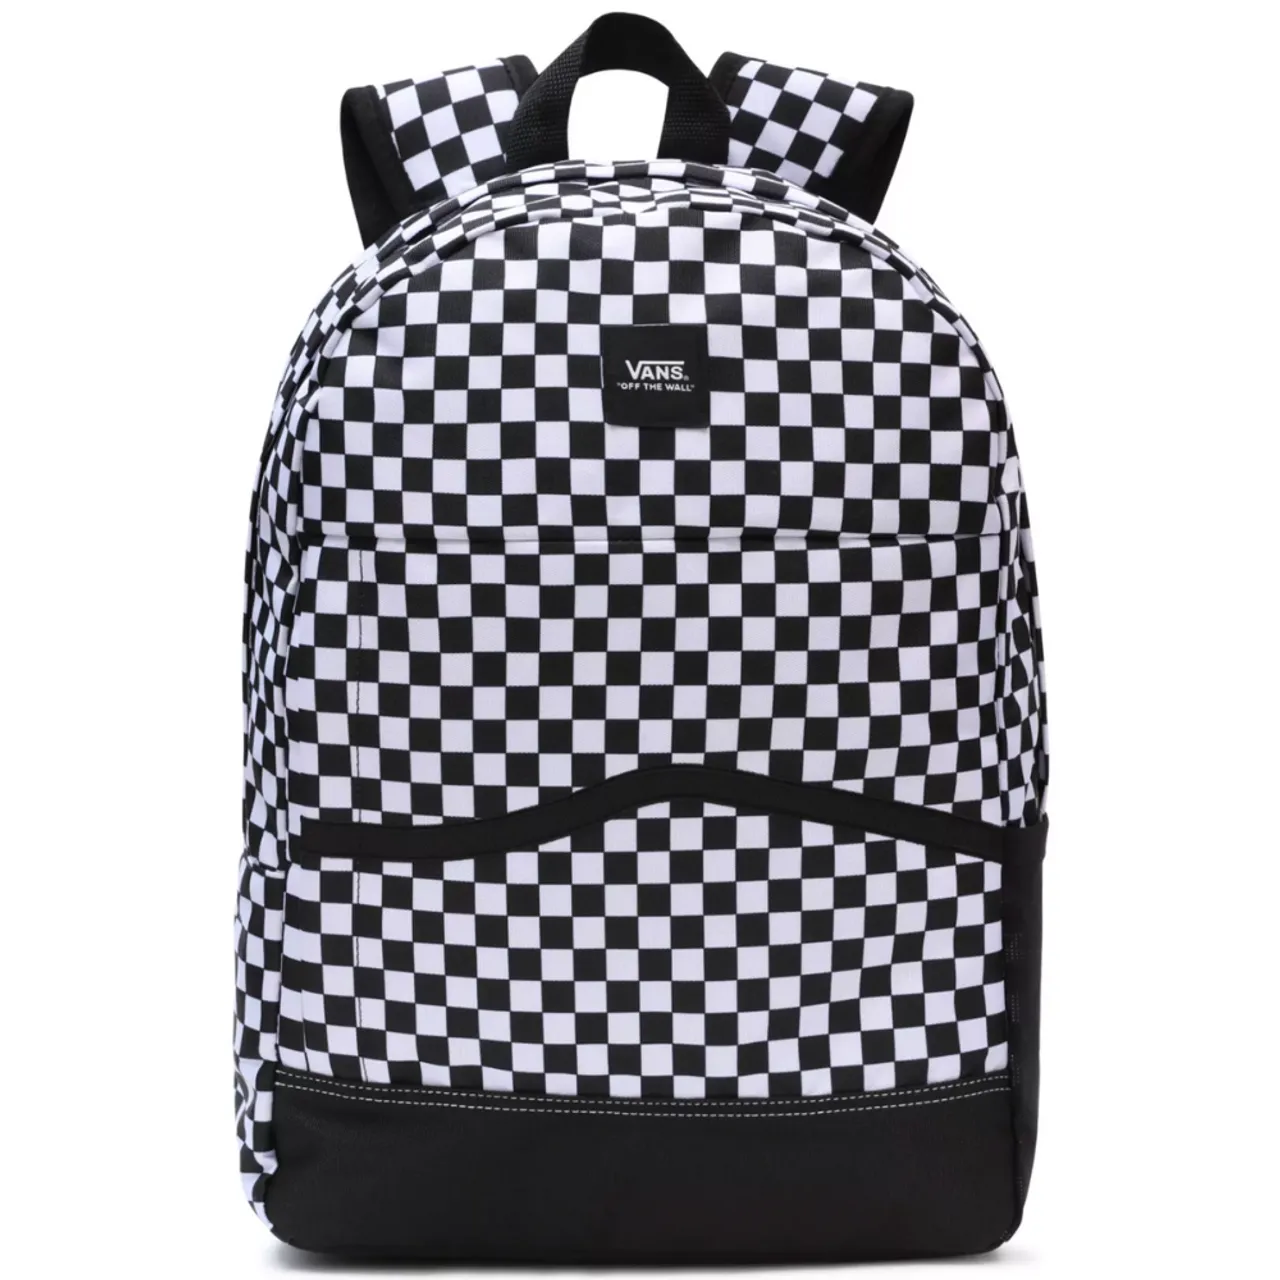 Construct Skool Backpack Checkers - 21L